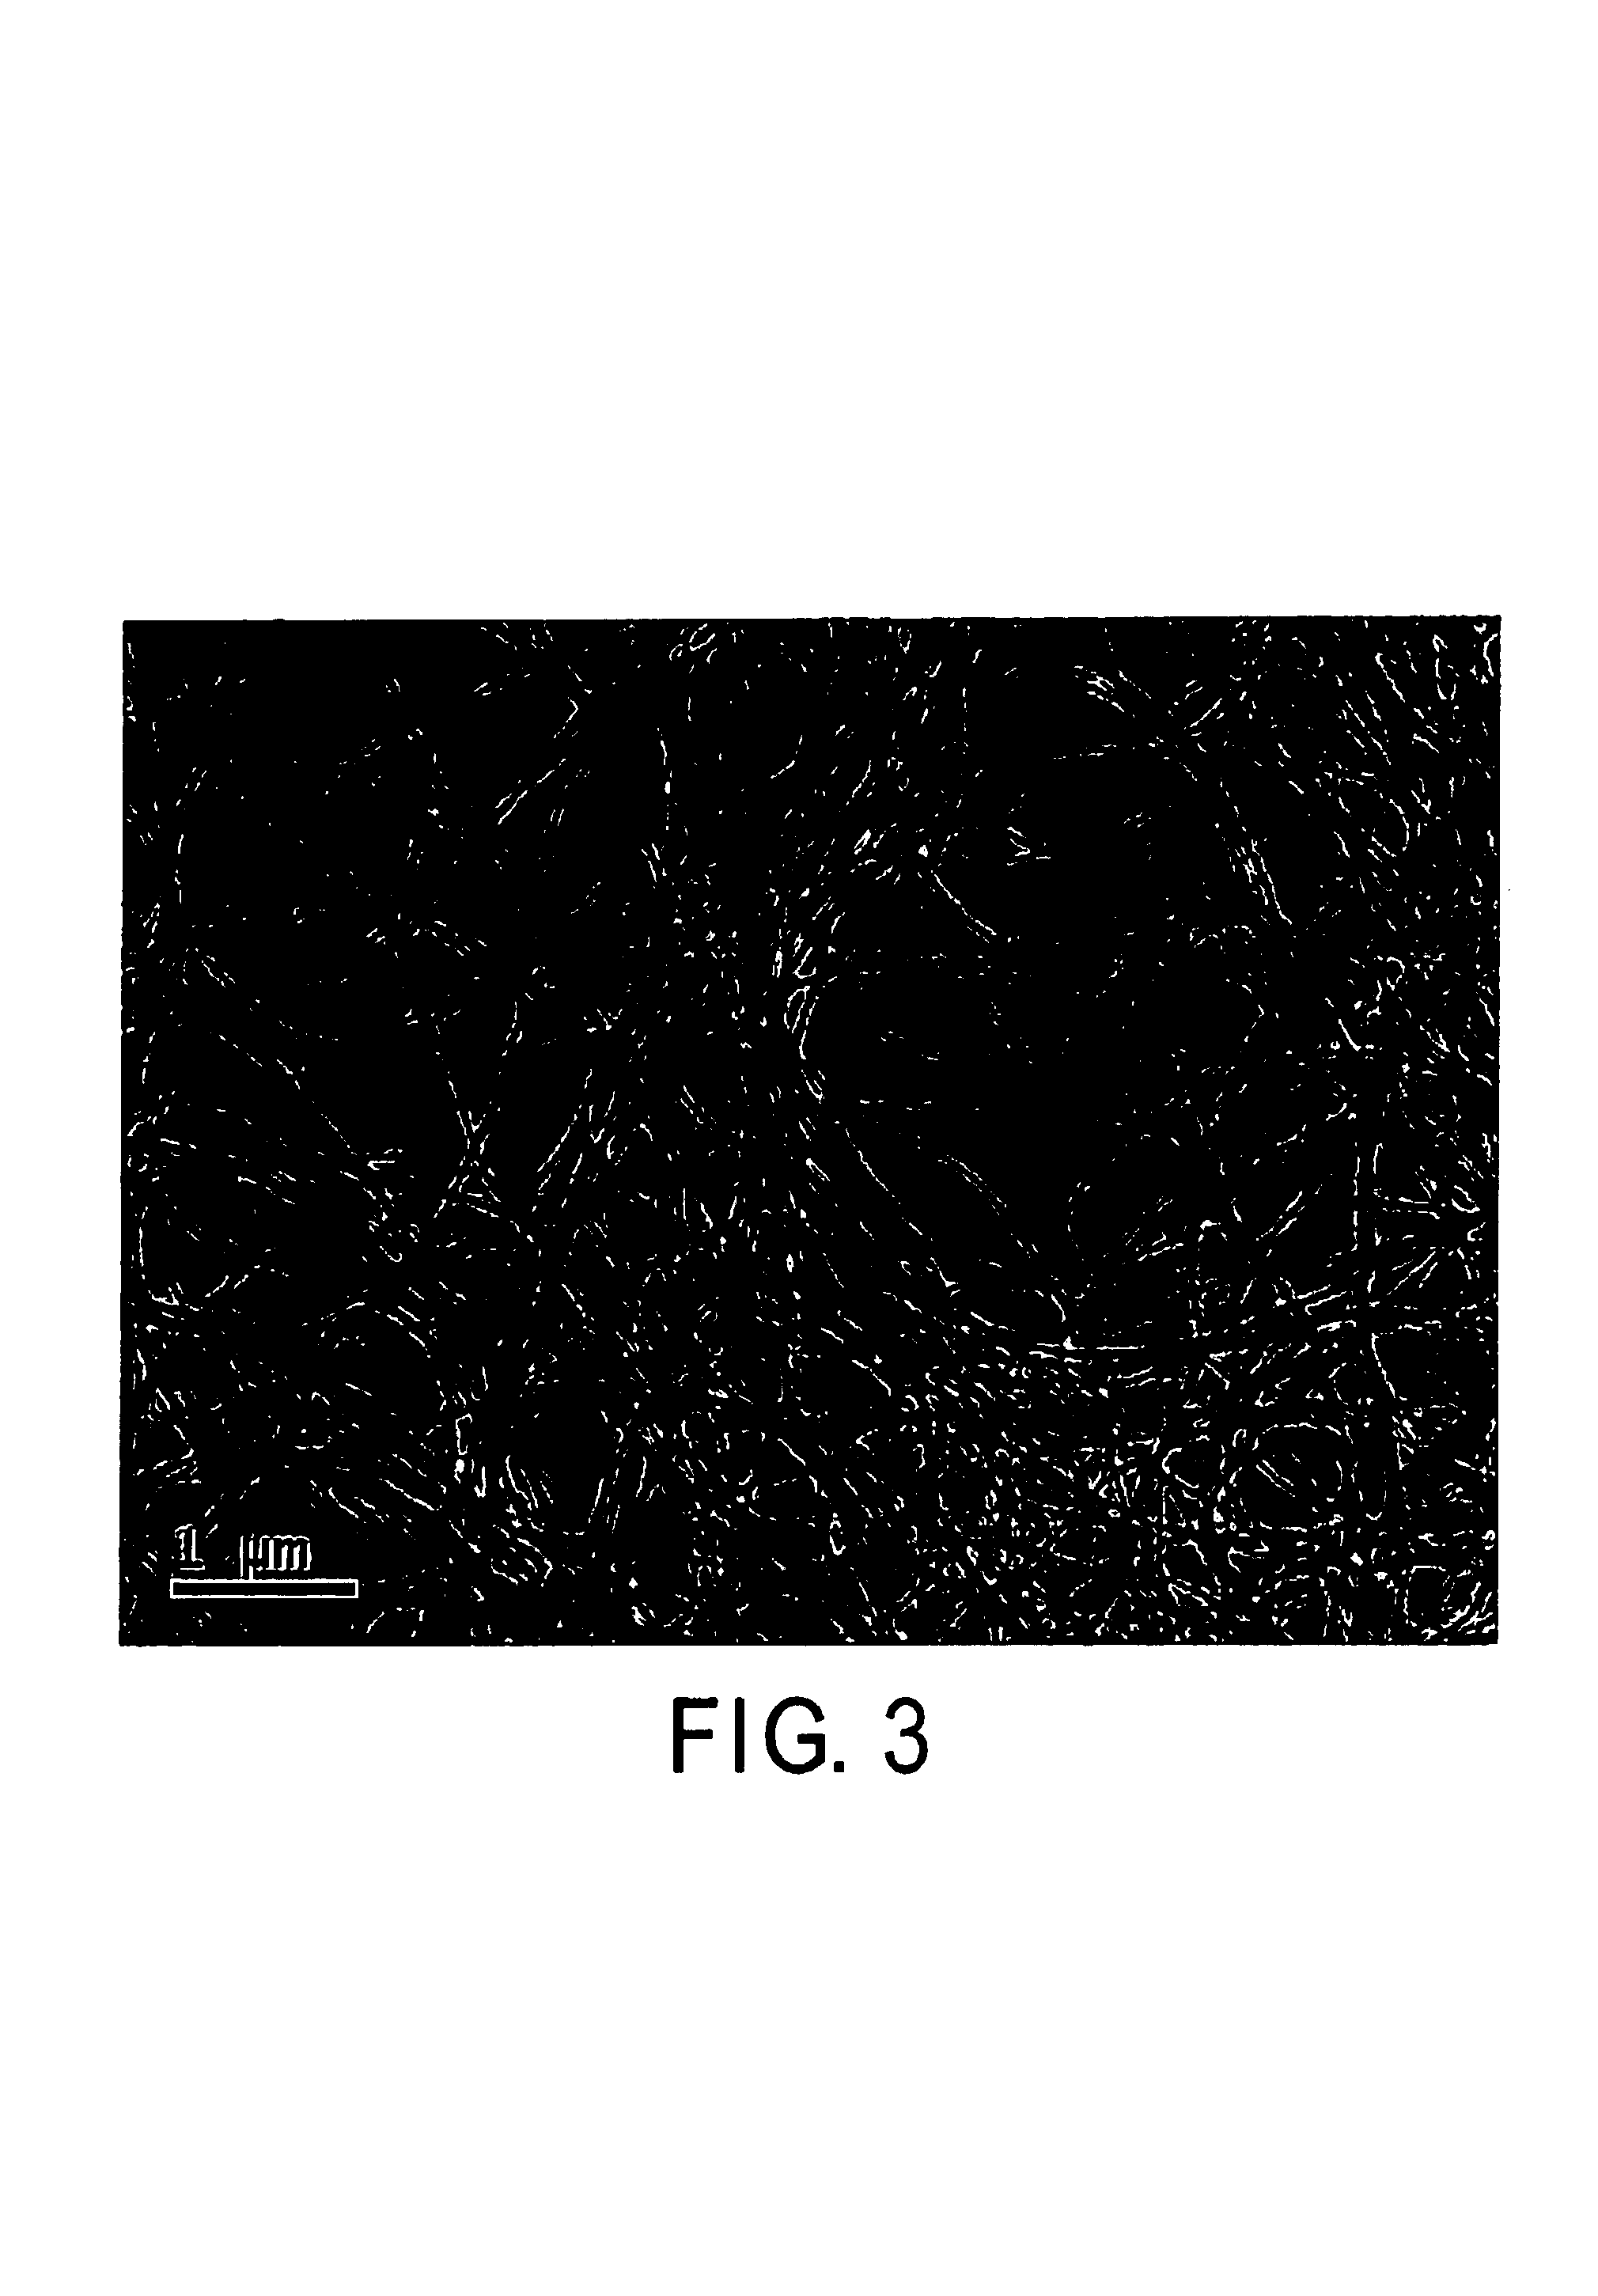 Coated electrode with enhanced electron emission and ignition characteristics